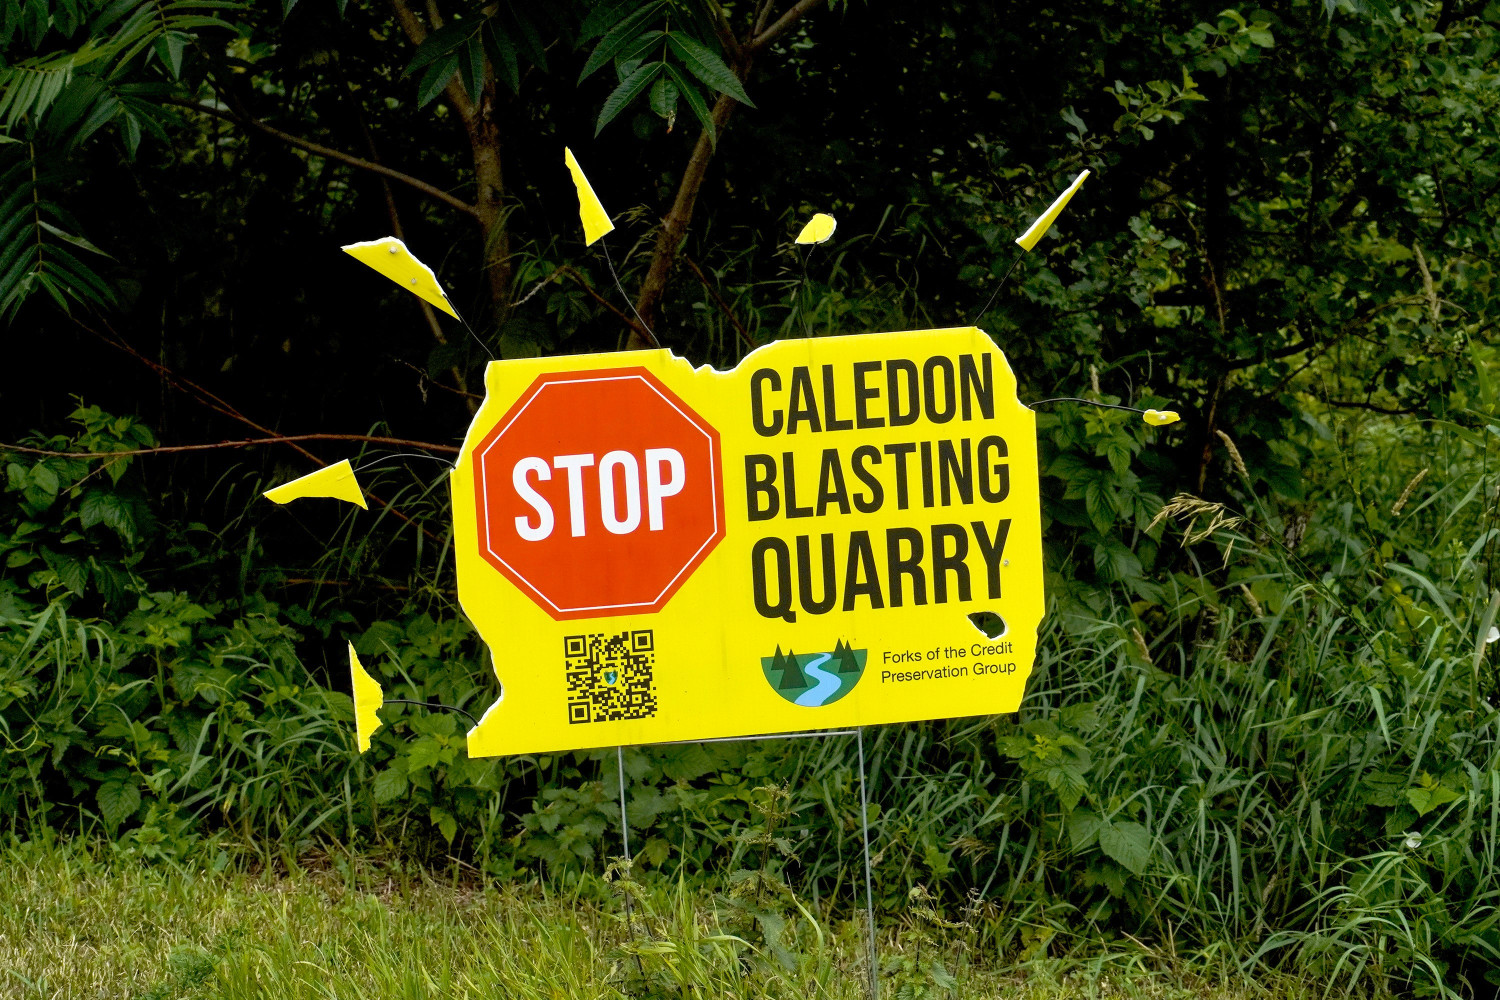 800-acre blasting quarry could hurt local Caledon businesses and tourism industry